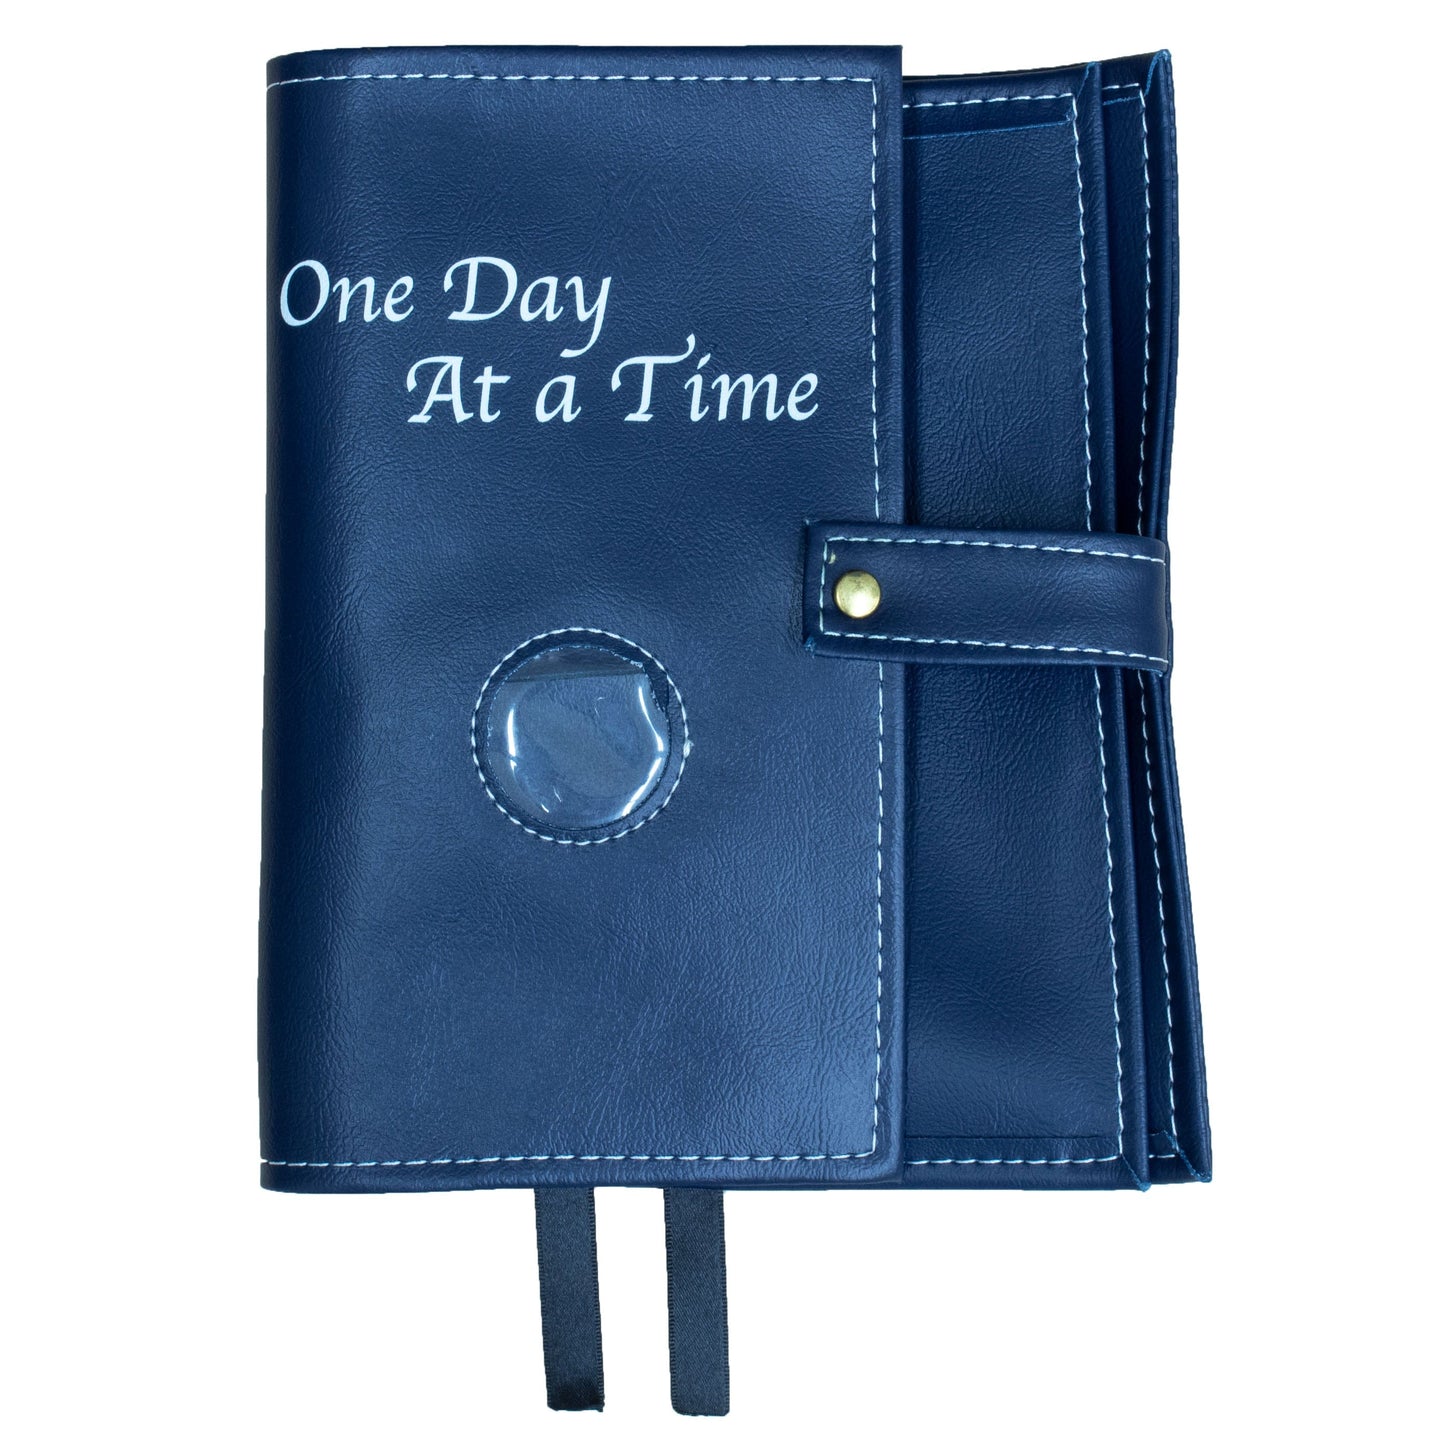 One Day At A Time Navy Blue Book Cover With Sobriety Chip Holder